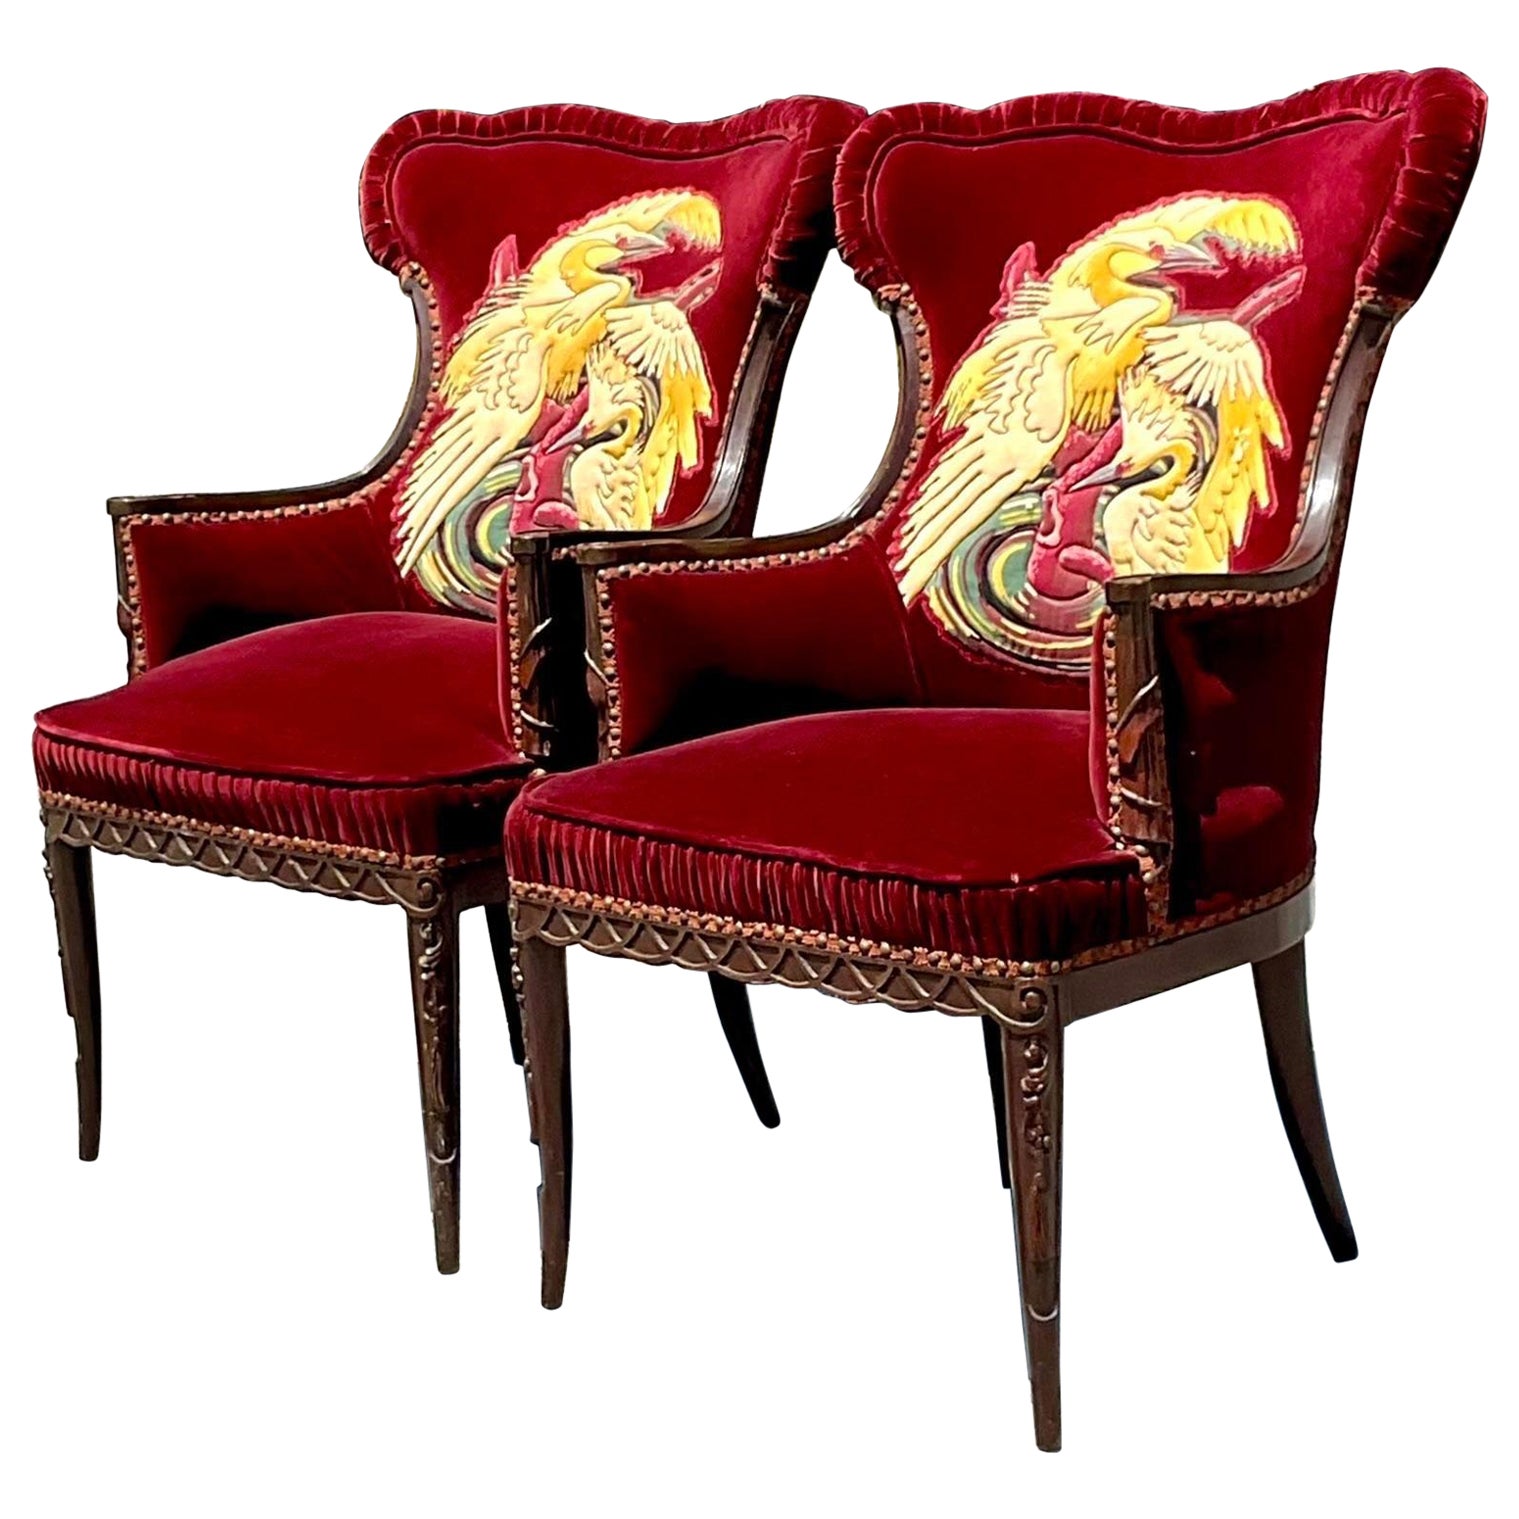 Vintage Boho Ruched Velvet Crane Arm Chairs - a Pair For Sale